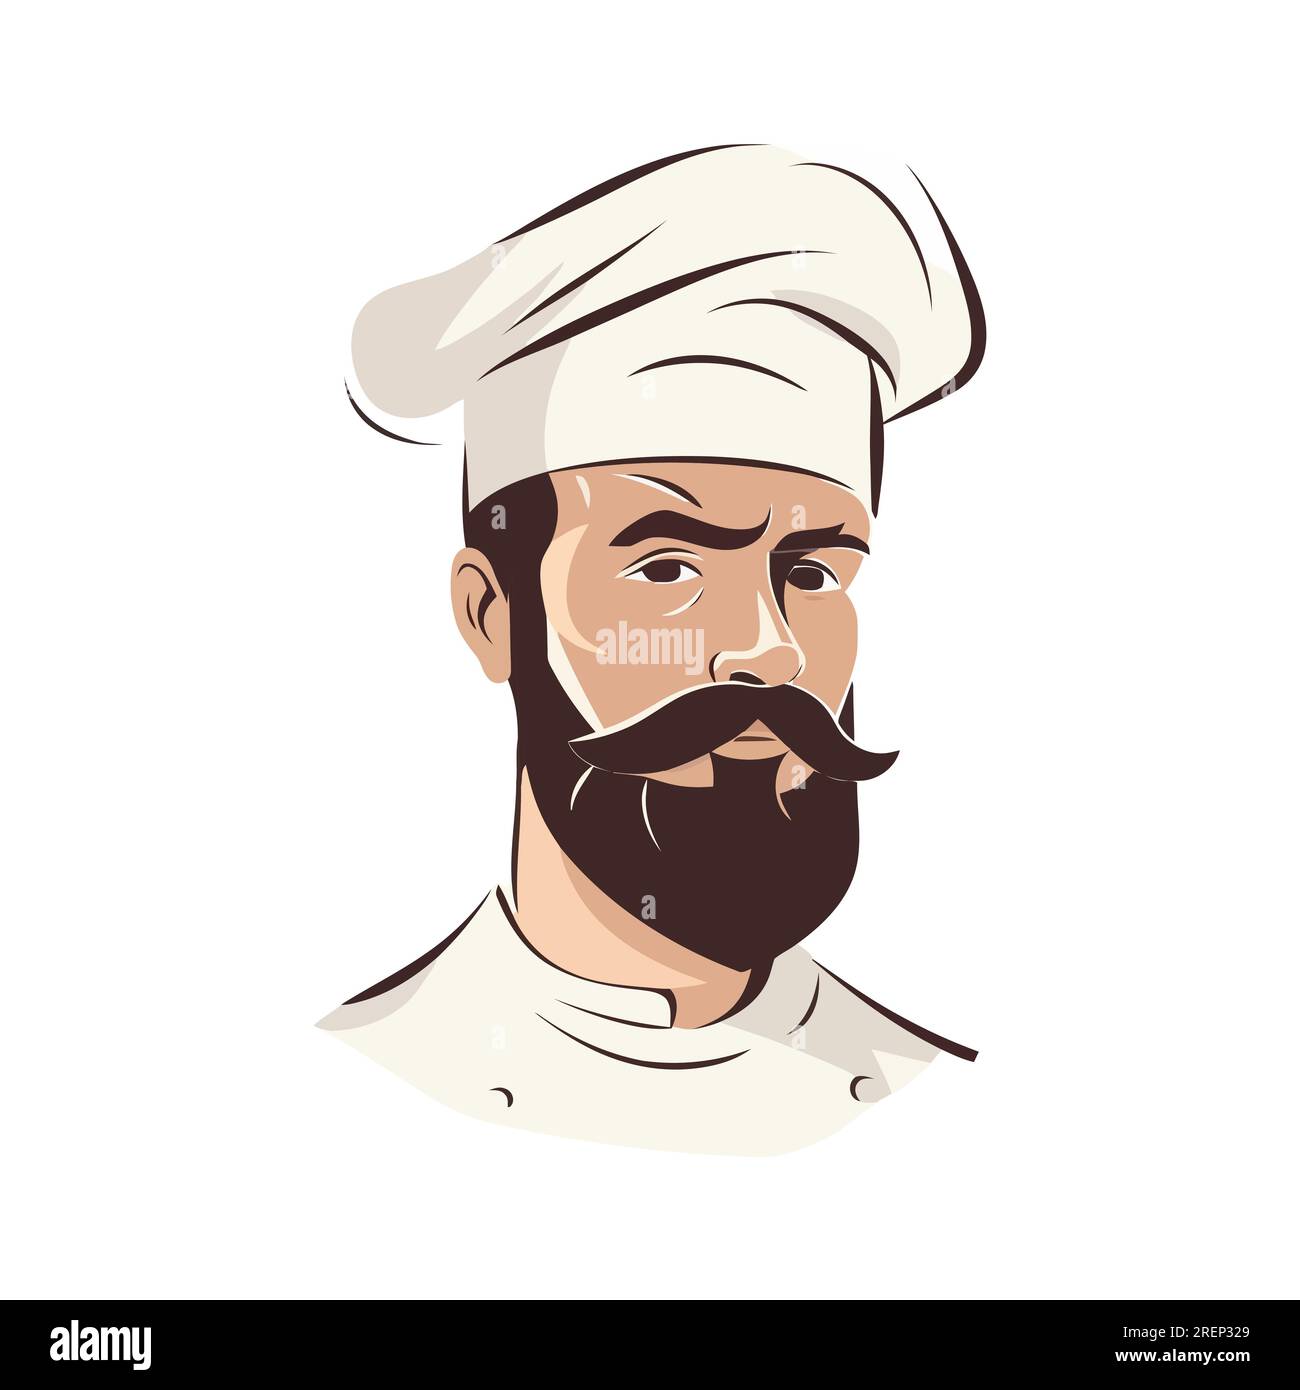 Chef logo design. Abstract drawing chef, cook or baker logo icon. Cute vector illustration Stock Vector